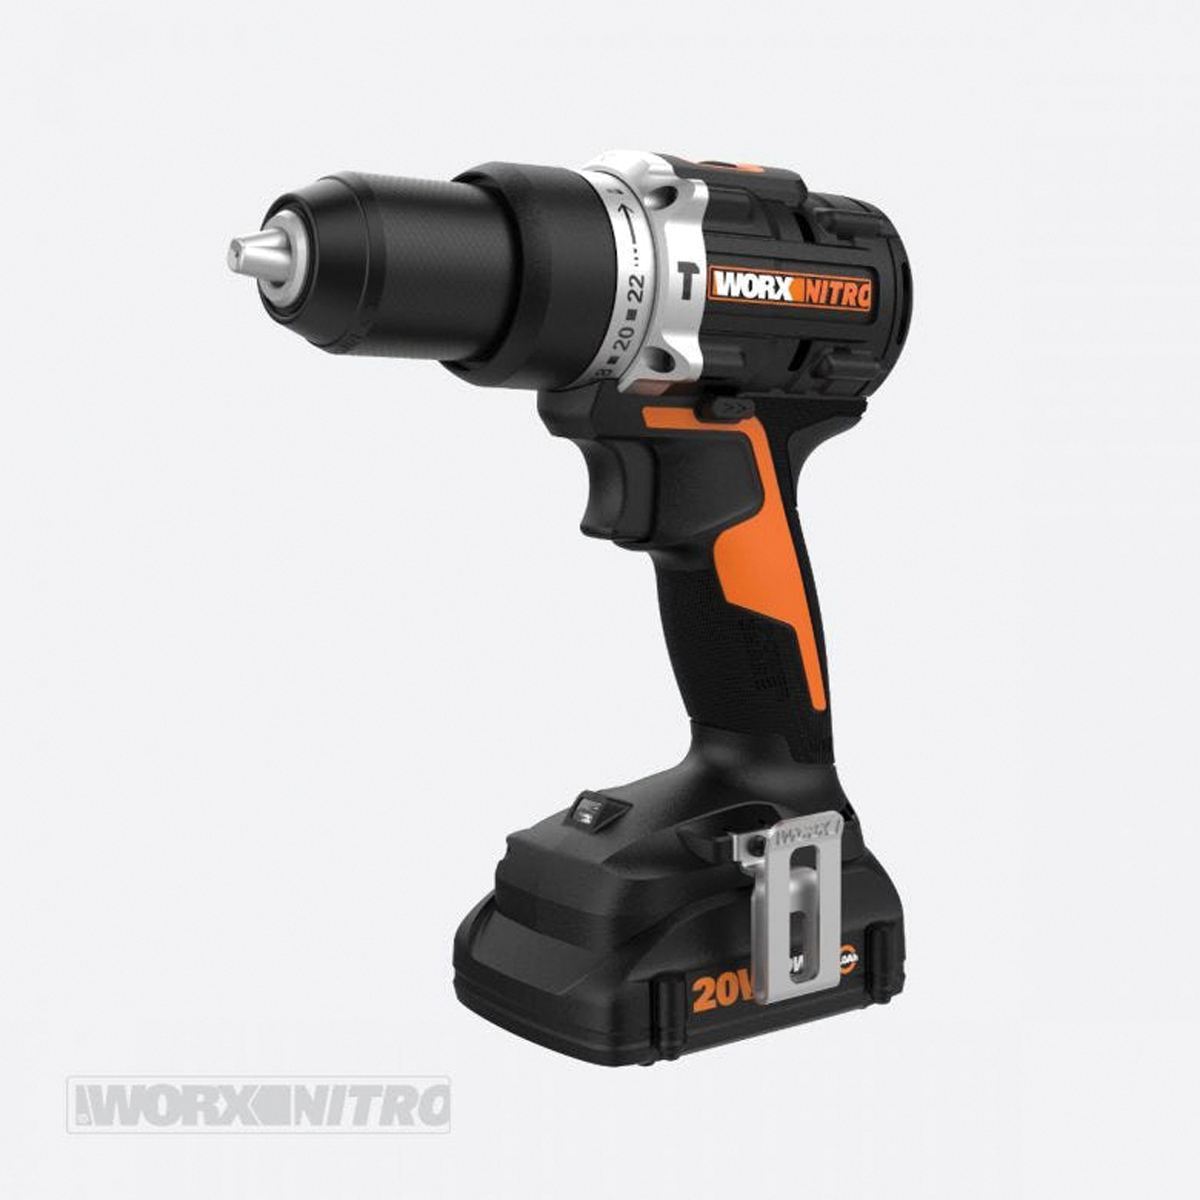 WORX Nitro WX352L Cordless Hammer Drill, Battery Included, 20 V, 2 Ah, 1/2 in Chuck, Ratcheting Chuck